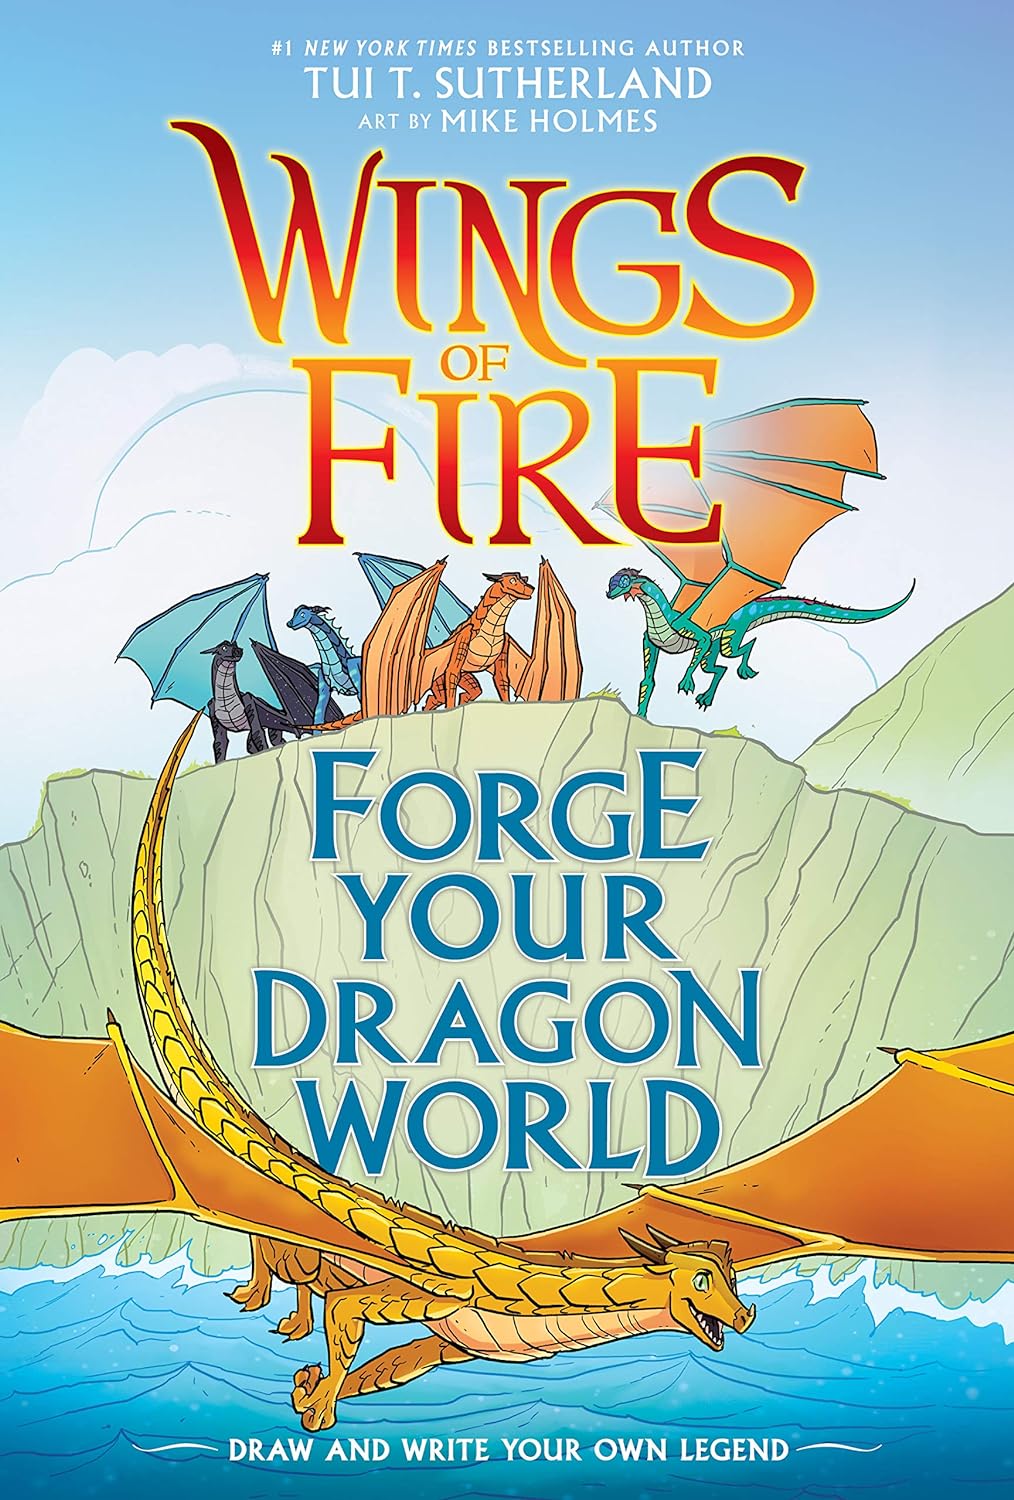 Forge Your Dragon World: A Wings of Fire Creative Guide (Wings of Fire Graphix) Hardcover – May 4, 2021